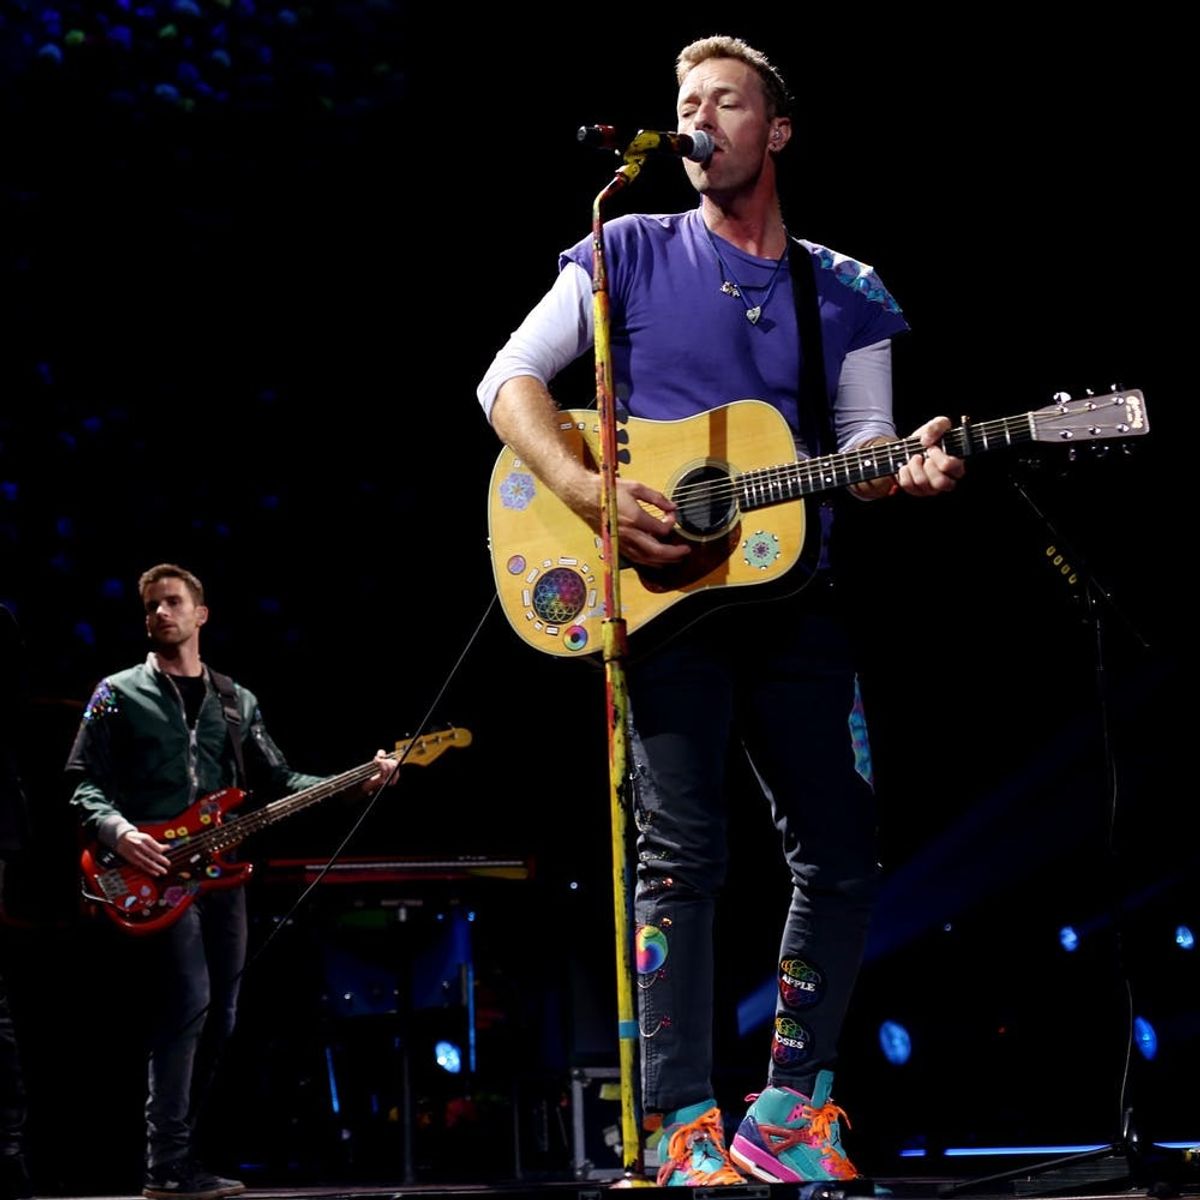 Coldplay’s Cover of Tom Petty’s “Free Fallin'” Is the Perfect Tribute